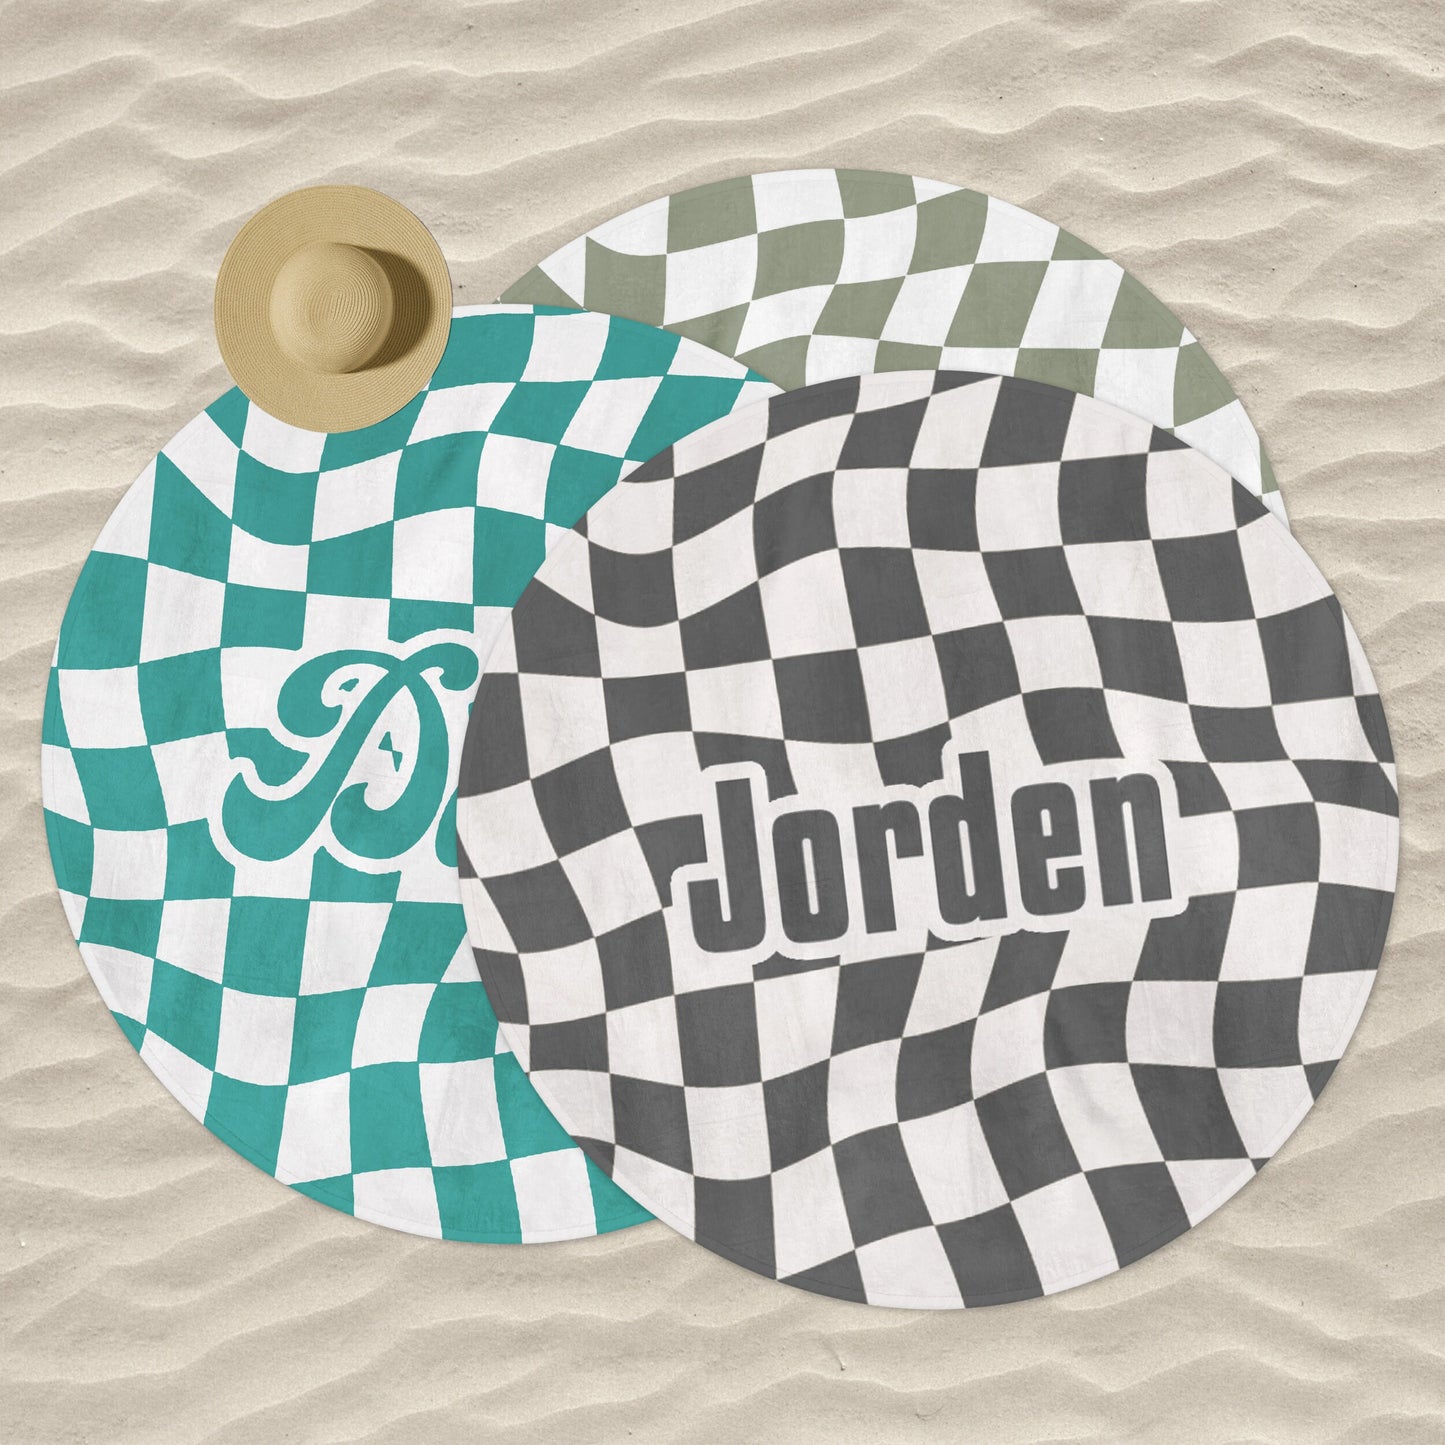 Personalized Vans CHECKER Pattern in Retro style Round Beach towel with Name, Large 60” Round beach towel gift, Birthday Anniversary Gift